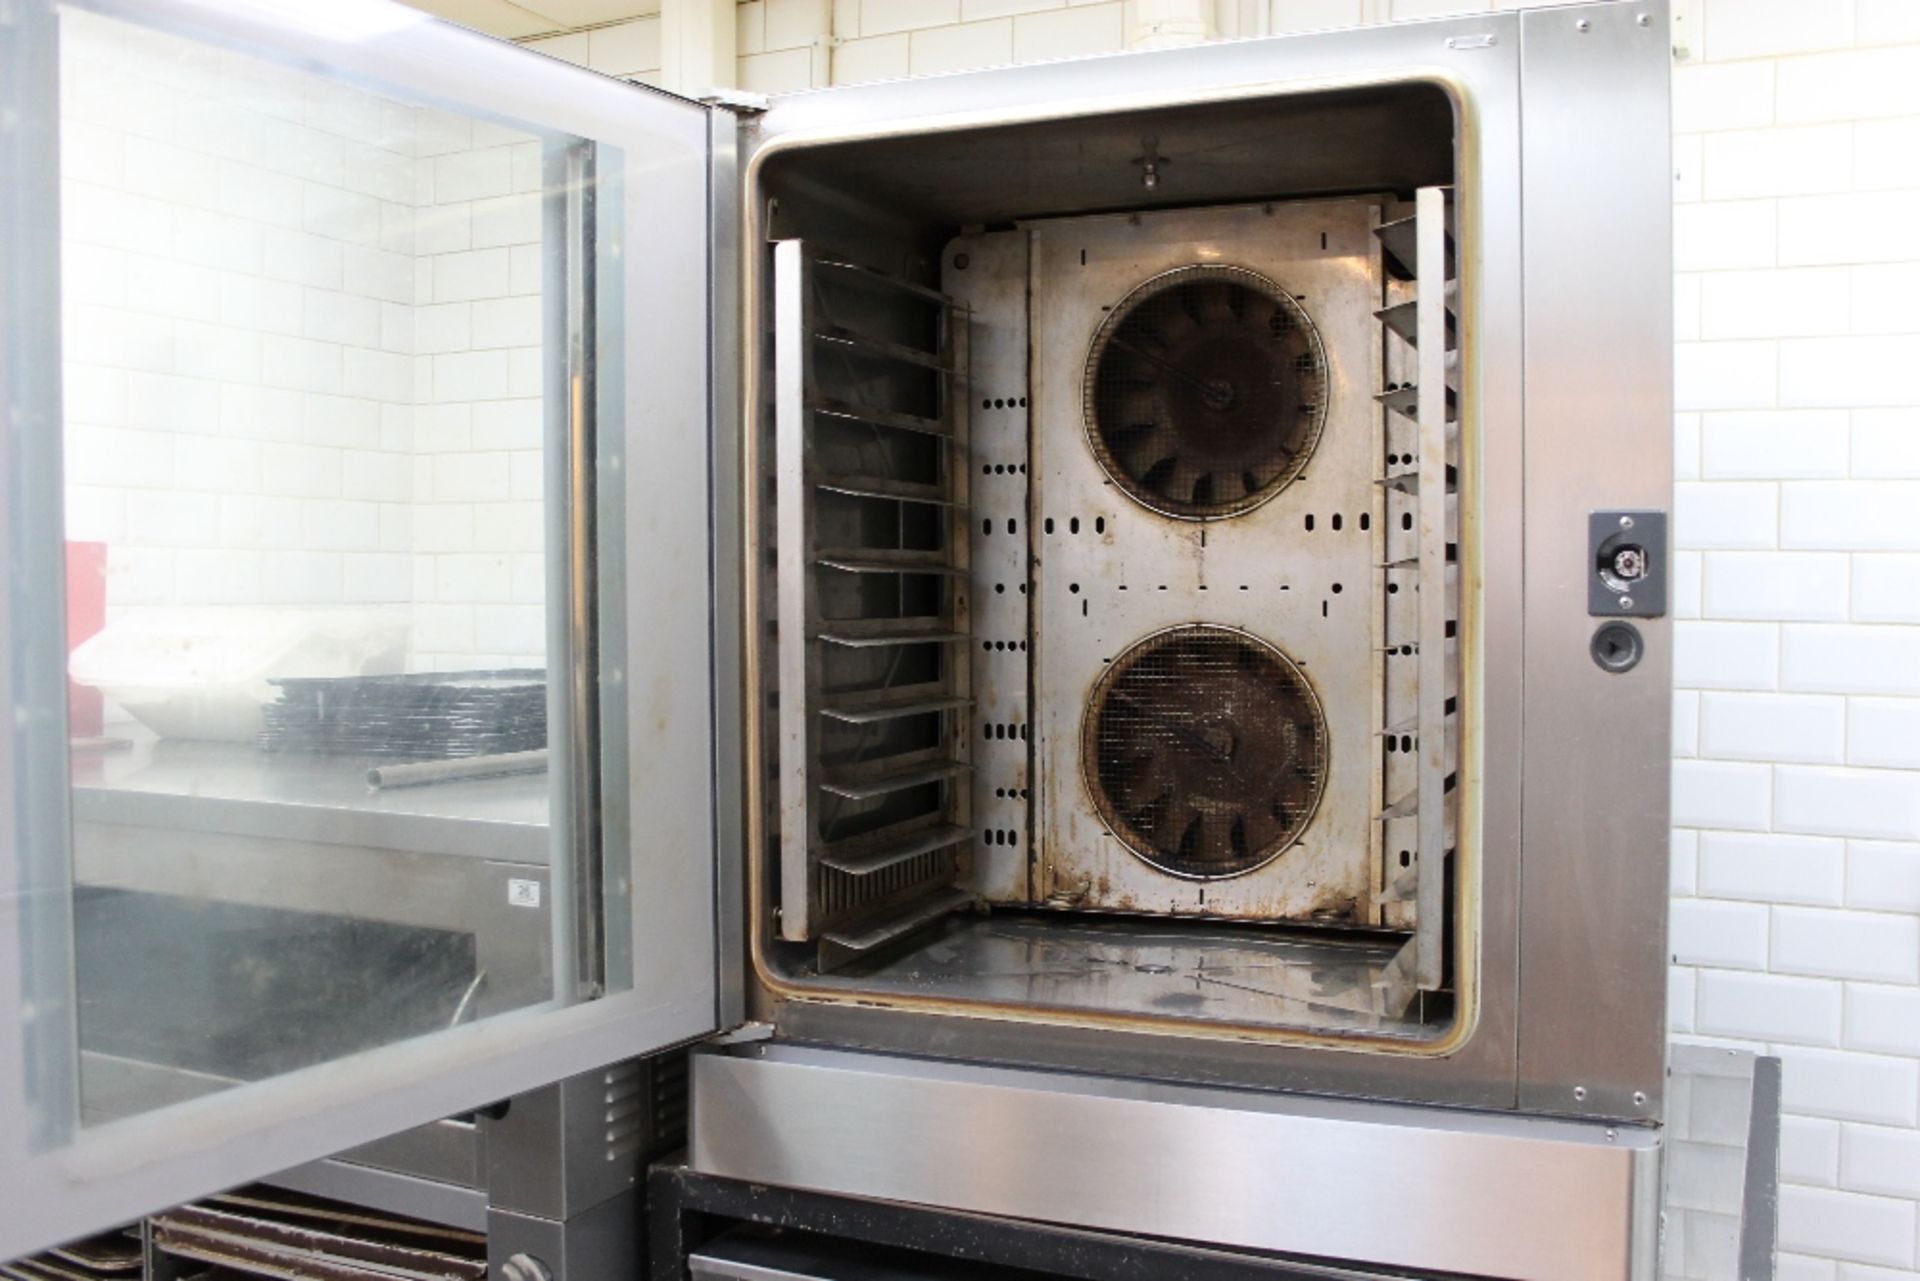 WIESHEU 10 Grid Electric Combi / Steam Oven – 3ph - Excellent “as new” condition - Image 2 of 2